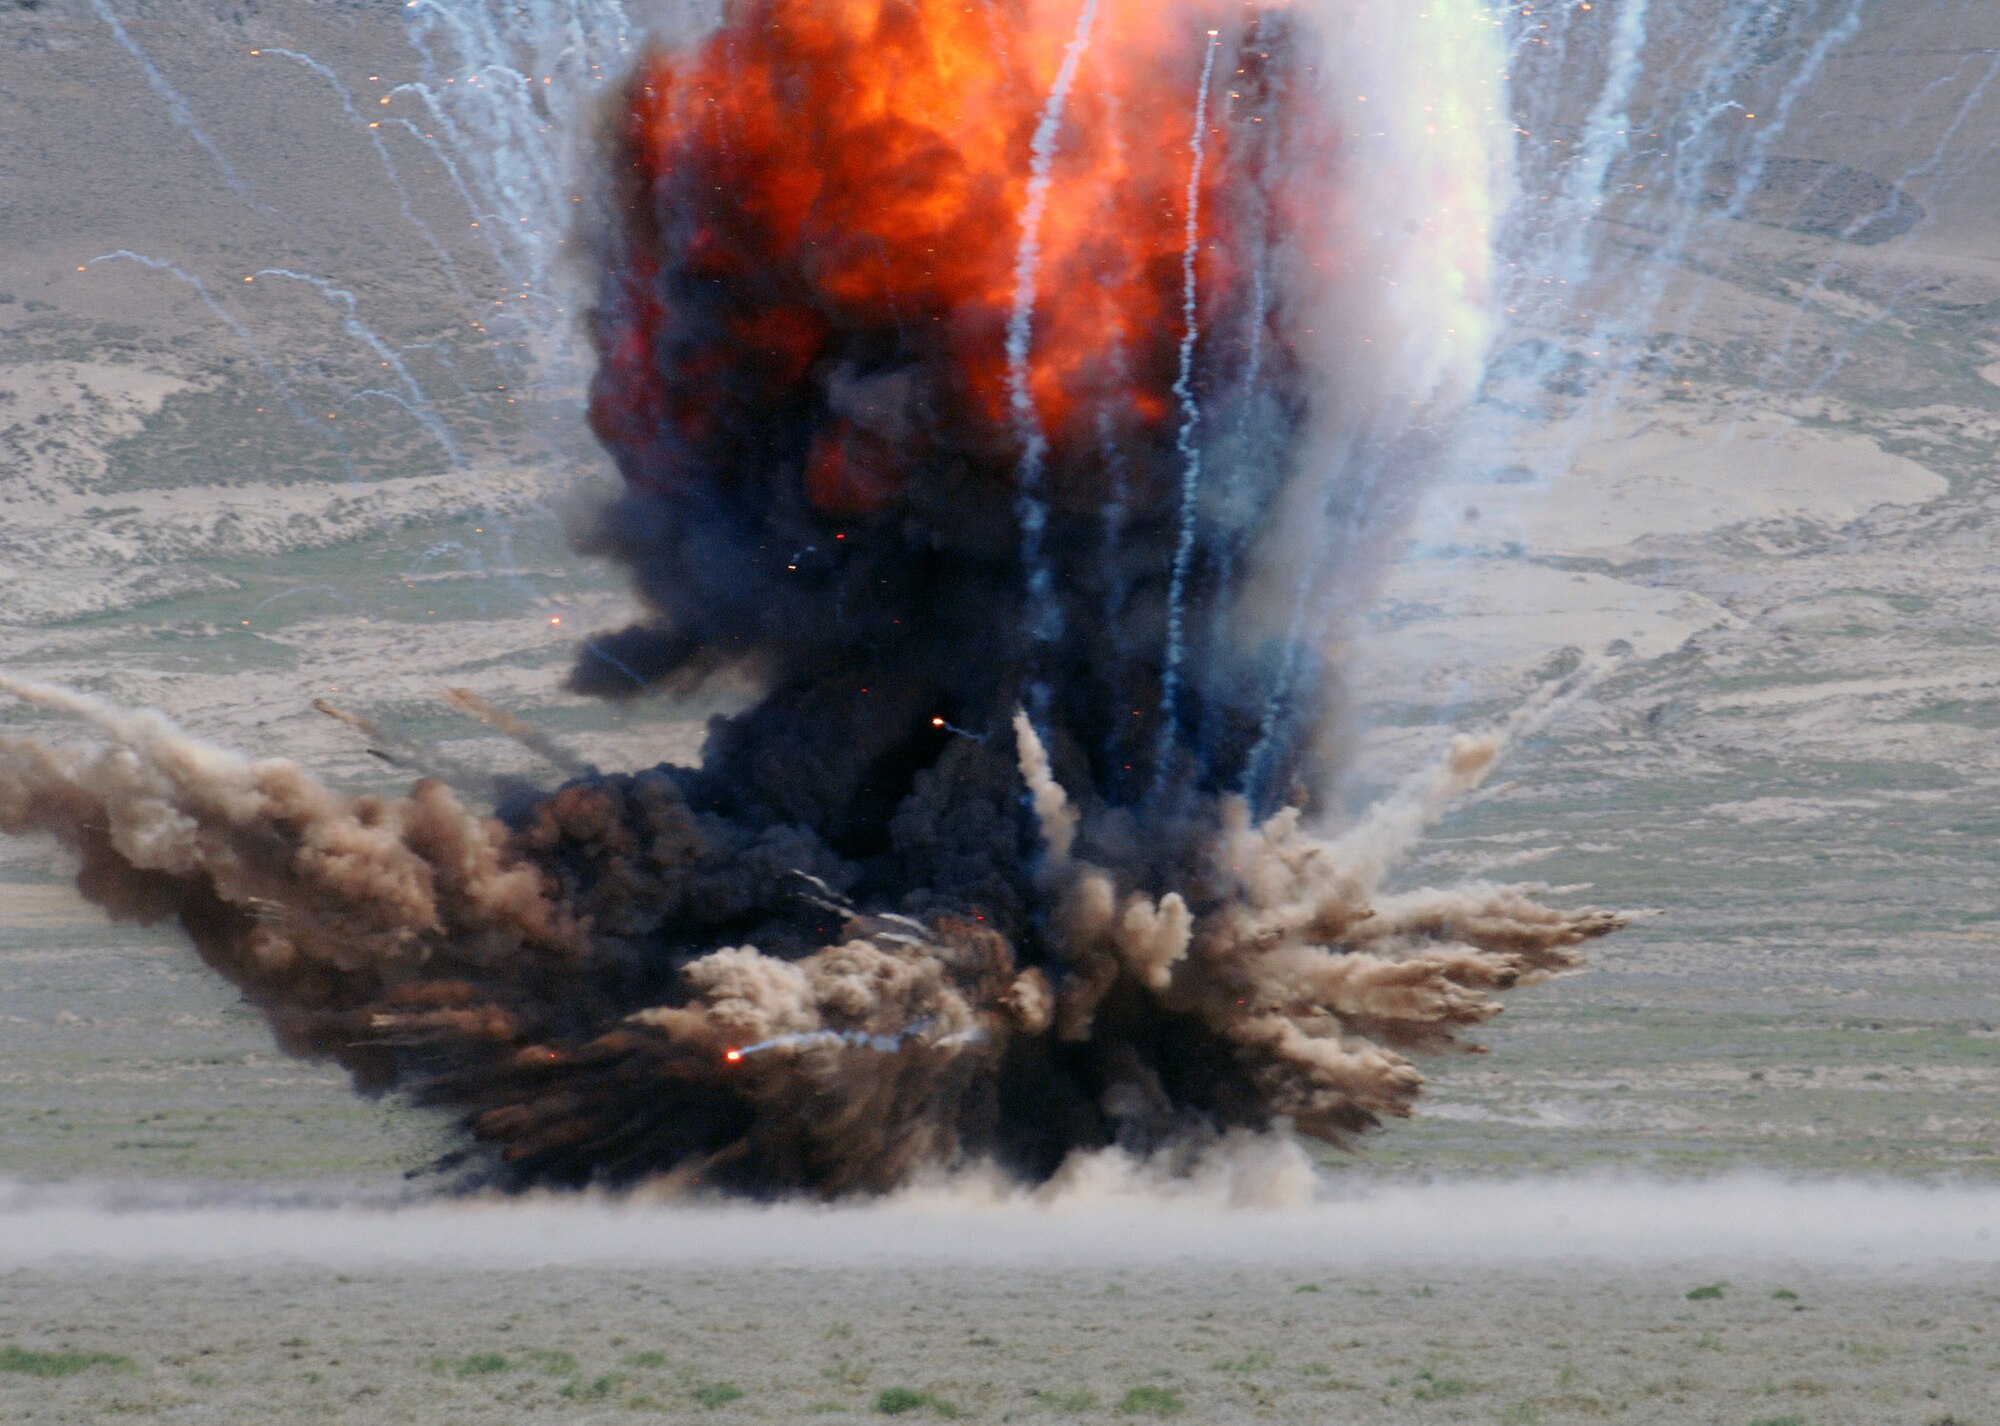 This is the explosion as the 755th Expeditionary Explosive Ordnance Disposal detonation team disposes of over 1,000 pounds of stored munitions, mines, and weapons caches at a controlled detonation outside of Bagram Airfield, Afghanistan June 13. (photo by Staff Sgt. Craig Seals)